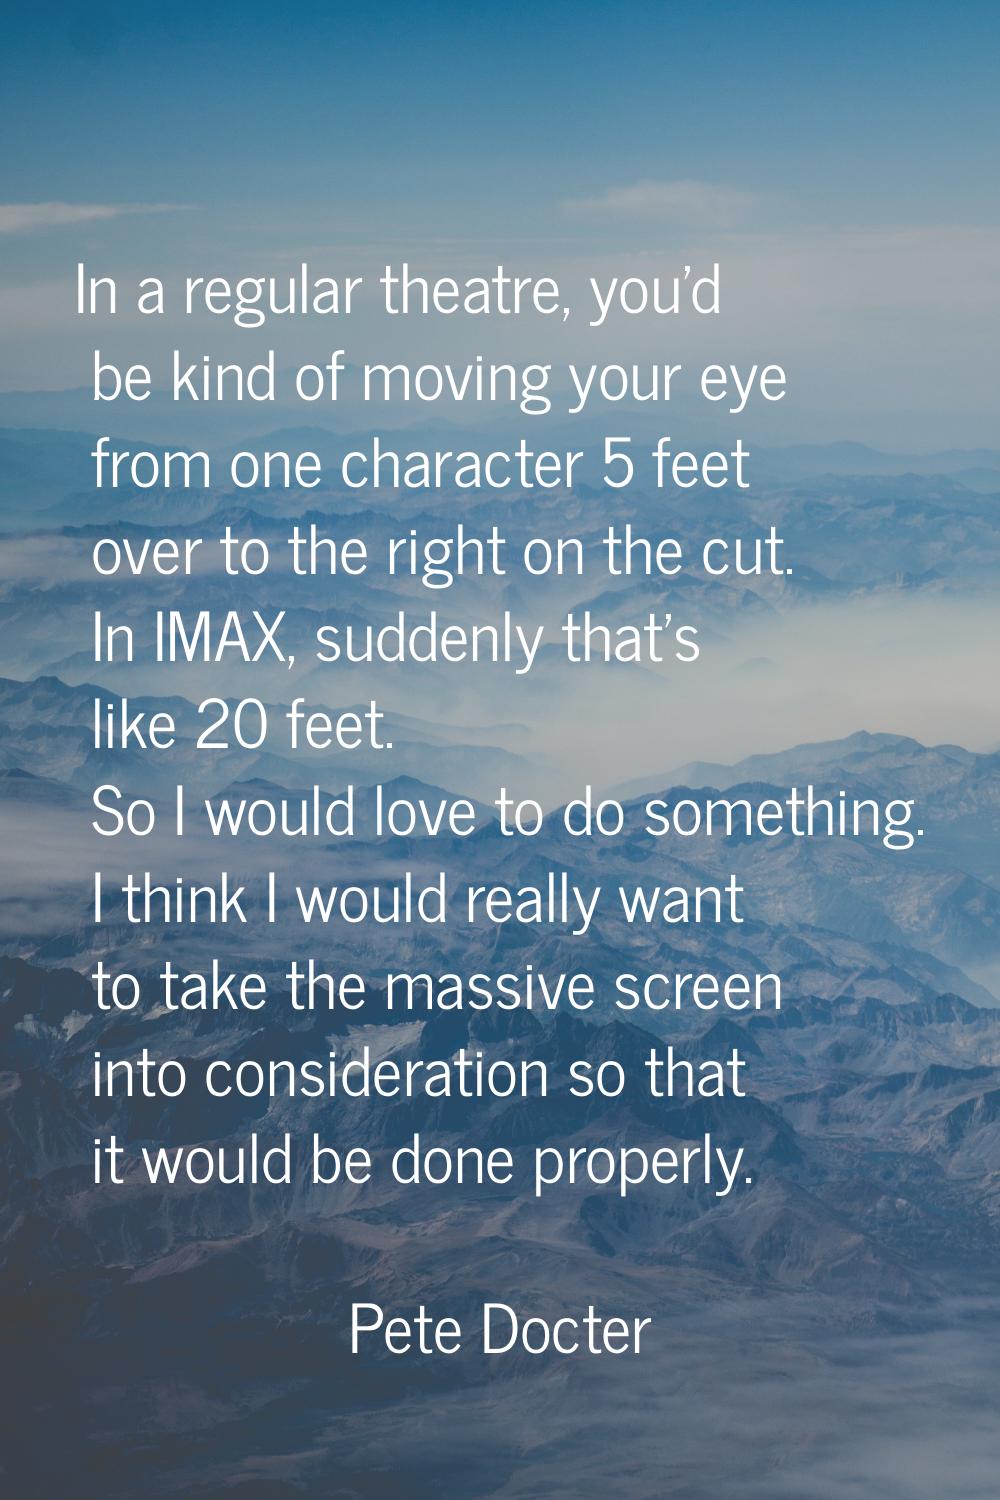 In a regular theatre, you'd be kind of moving your eye from one character 5 feet over to the right 